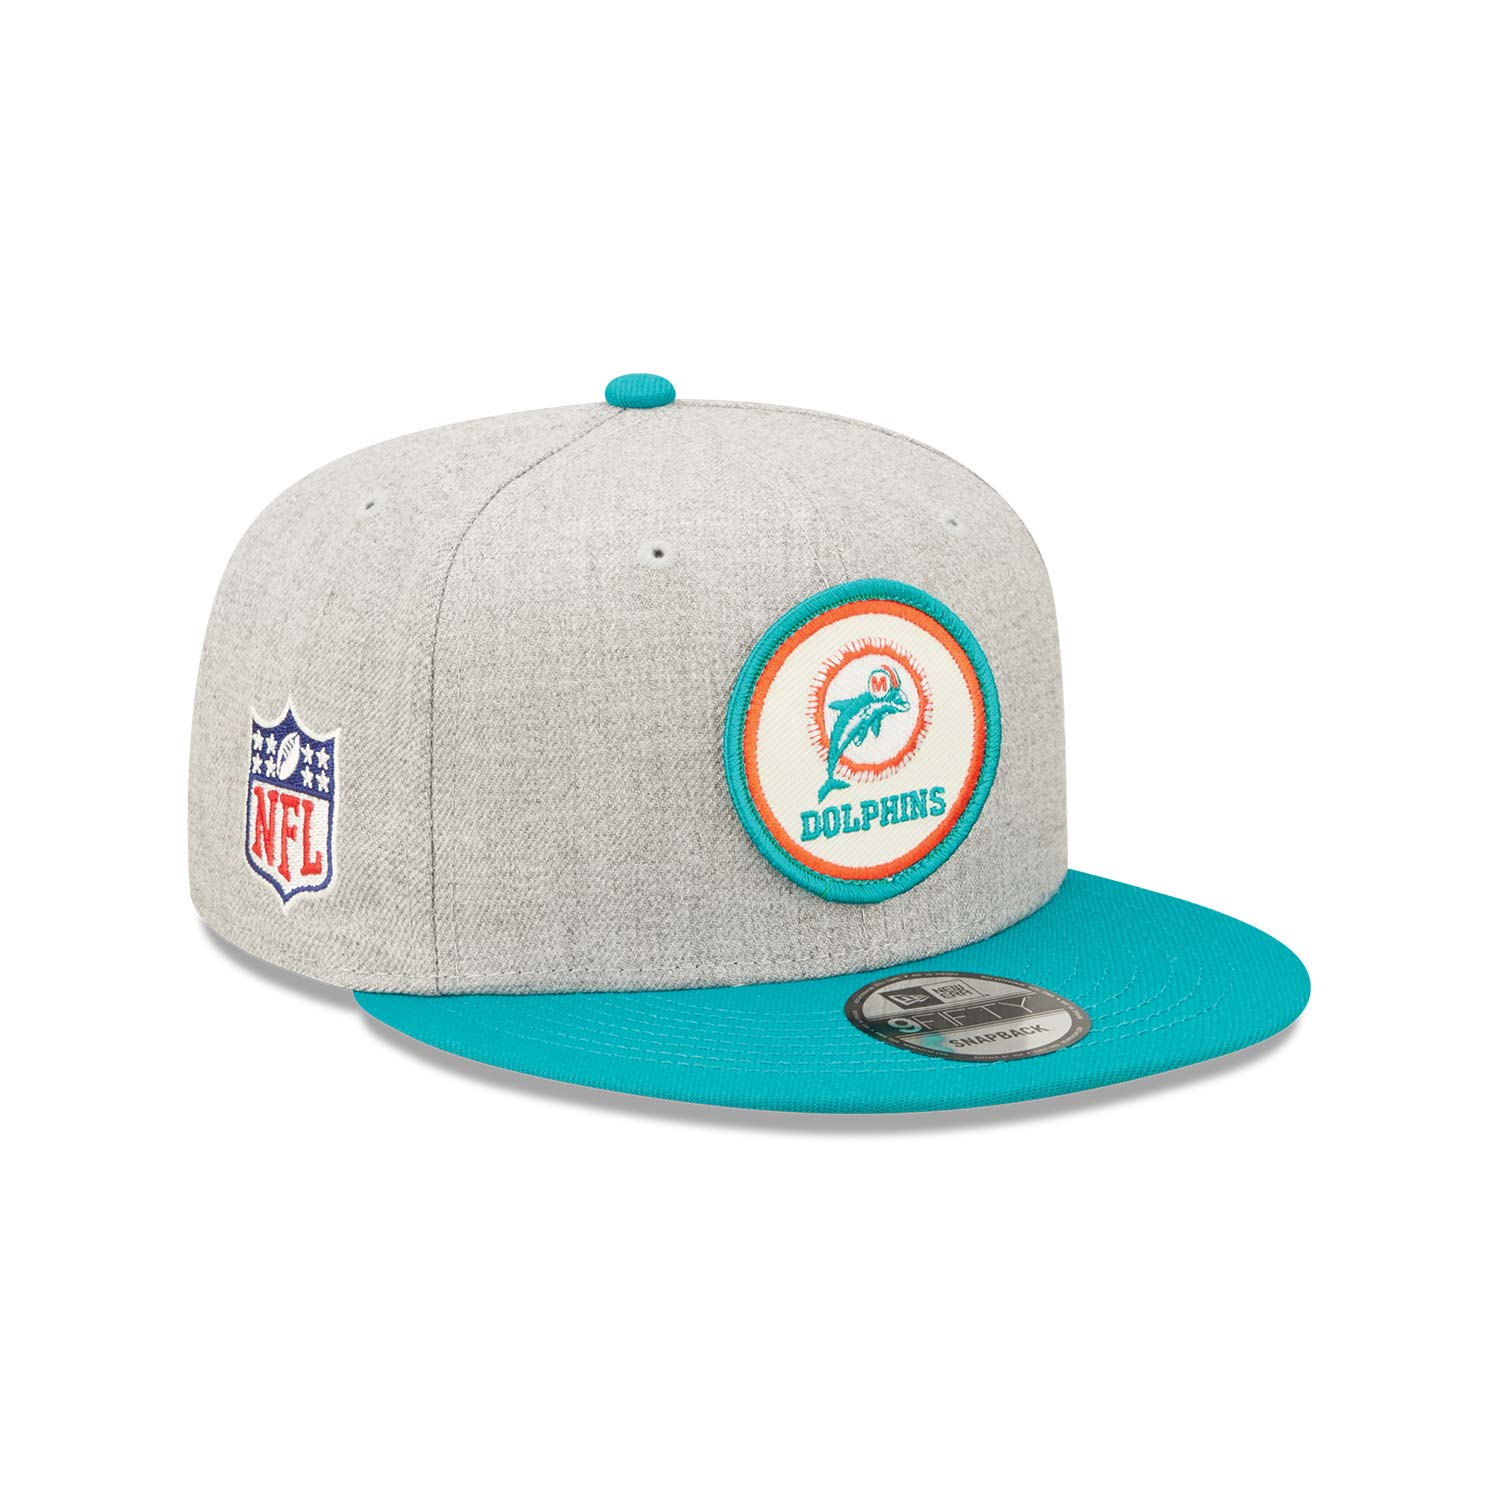 Official New Era Miami Dolphins NFL 22 Historic Sideline Heather Grey ...